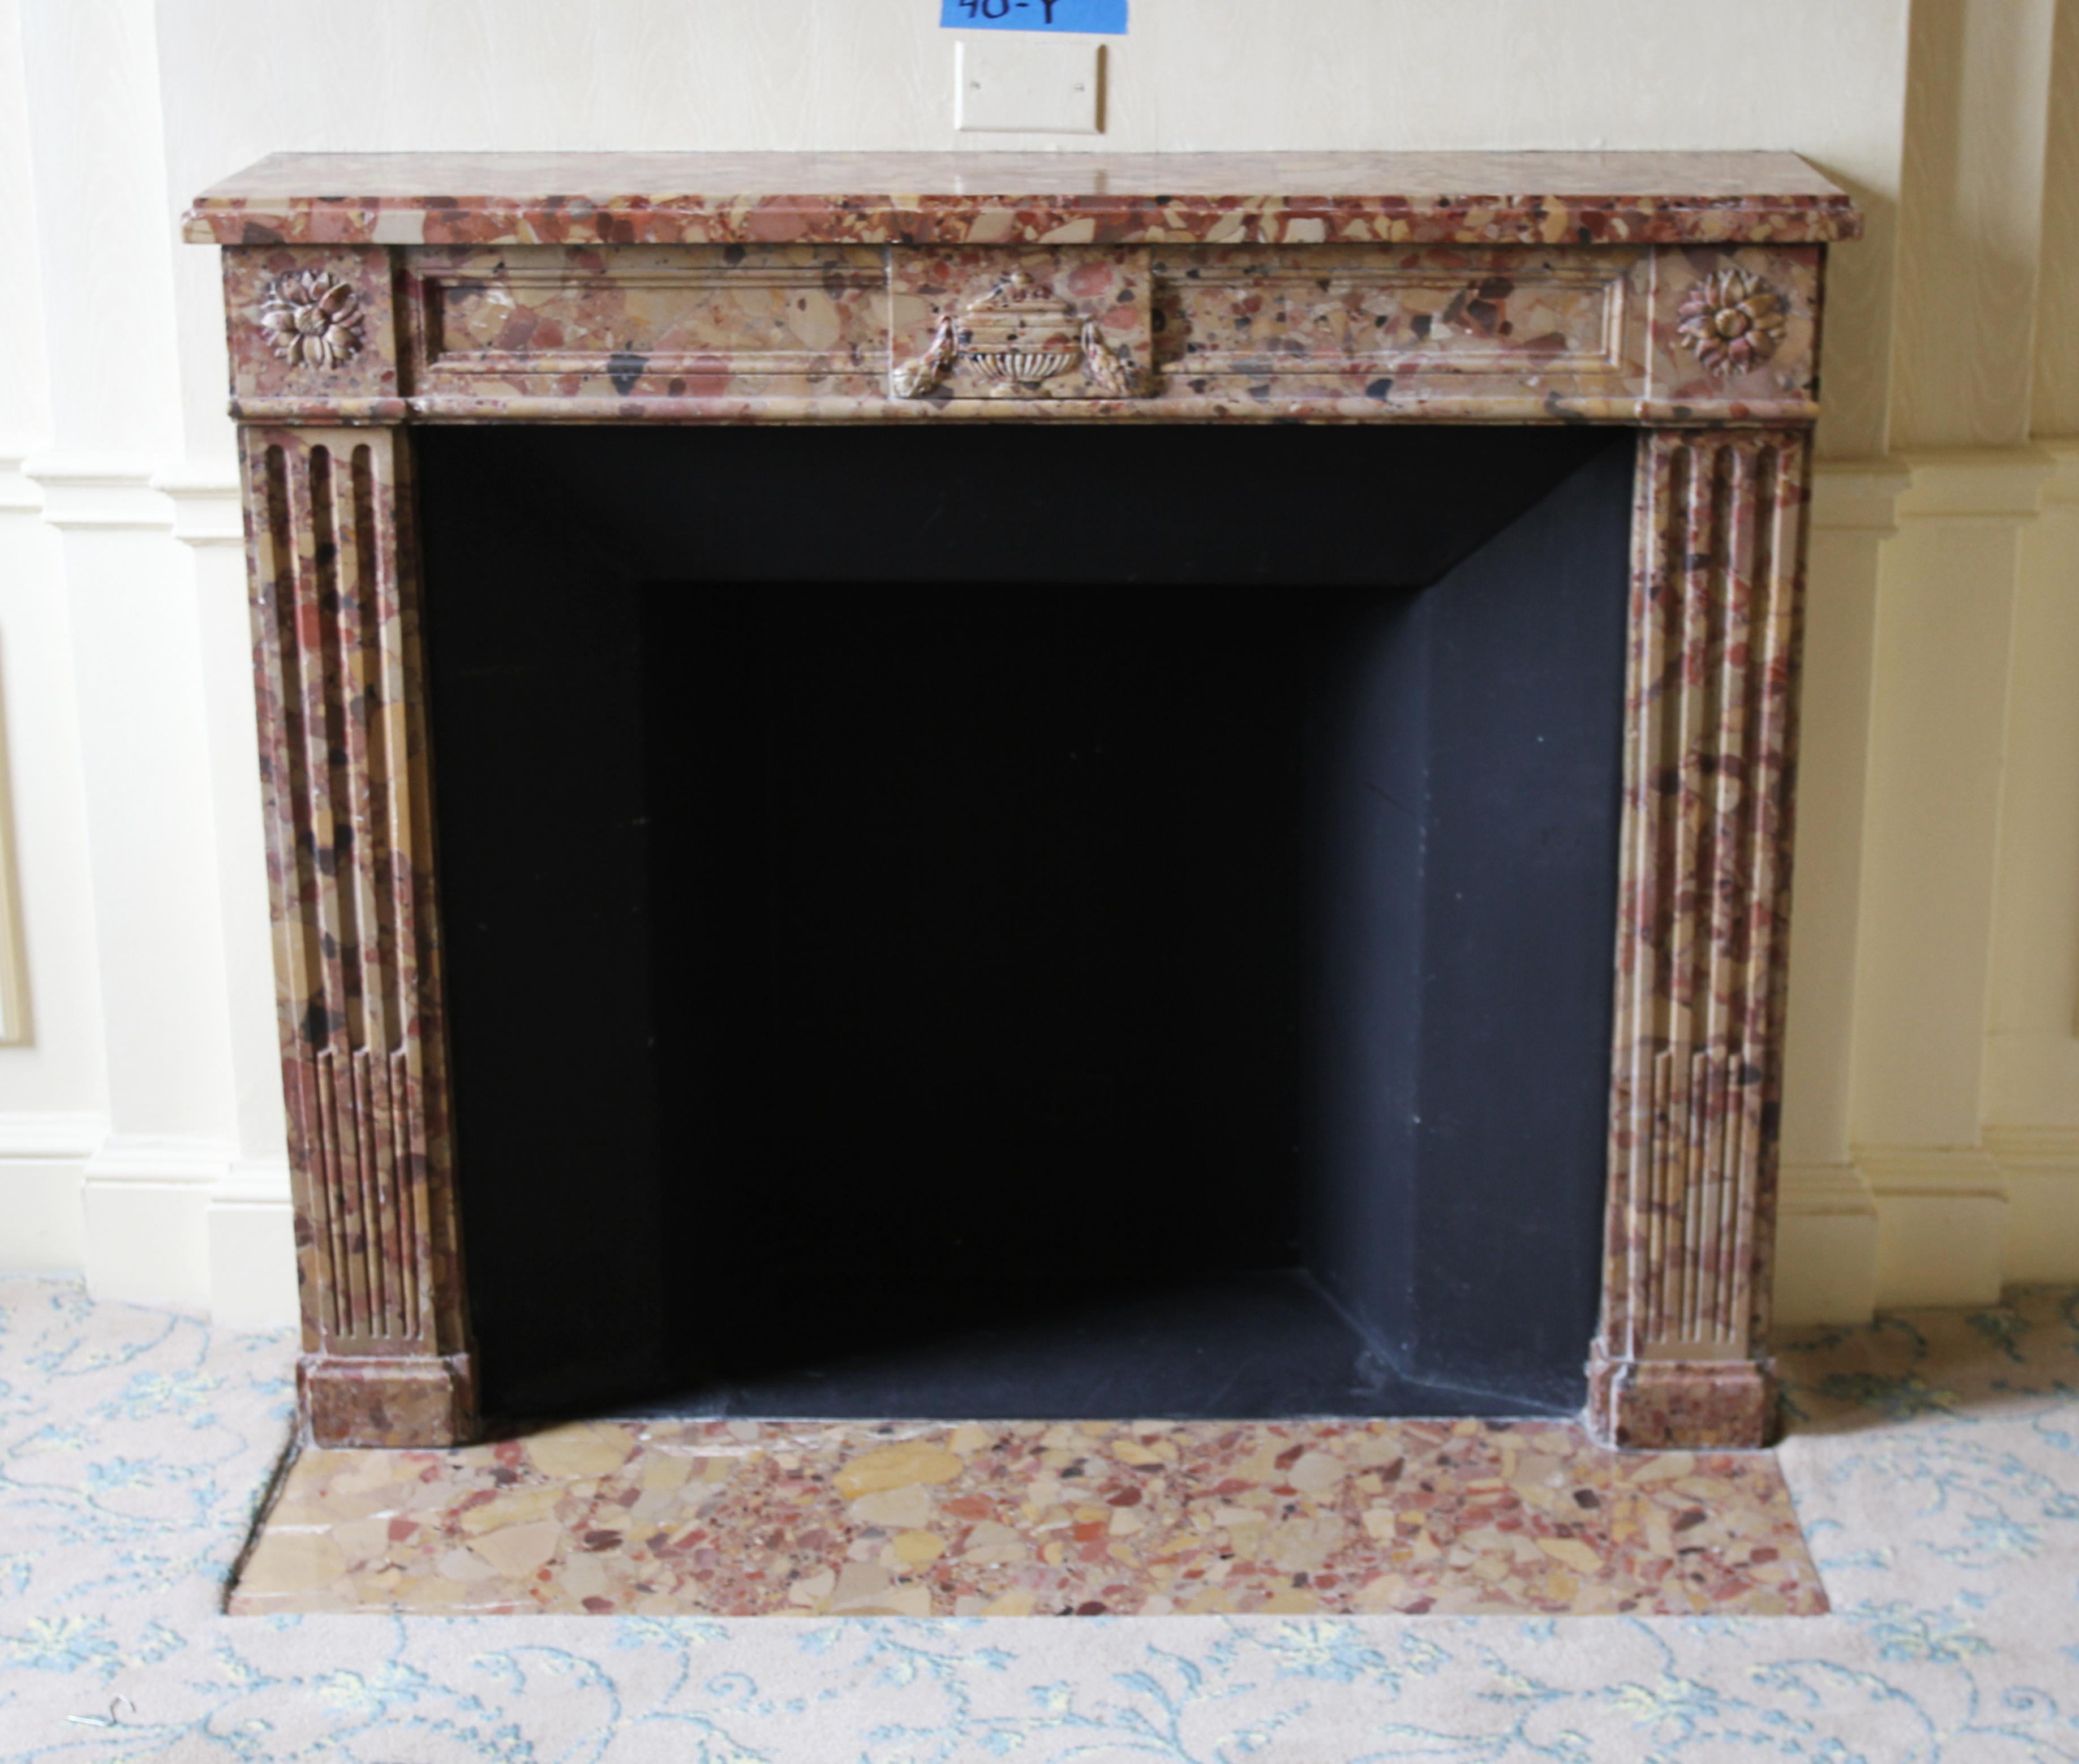 1880s yellow Breche marble mantel with gray, red and tan coloring. This mantel has pretty floral motifs on the top plinths and a carved urn in the middle of the header. This mantel was one of a group of antique mantels imported from Europe and